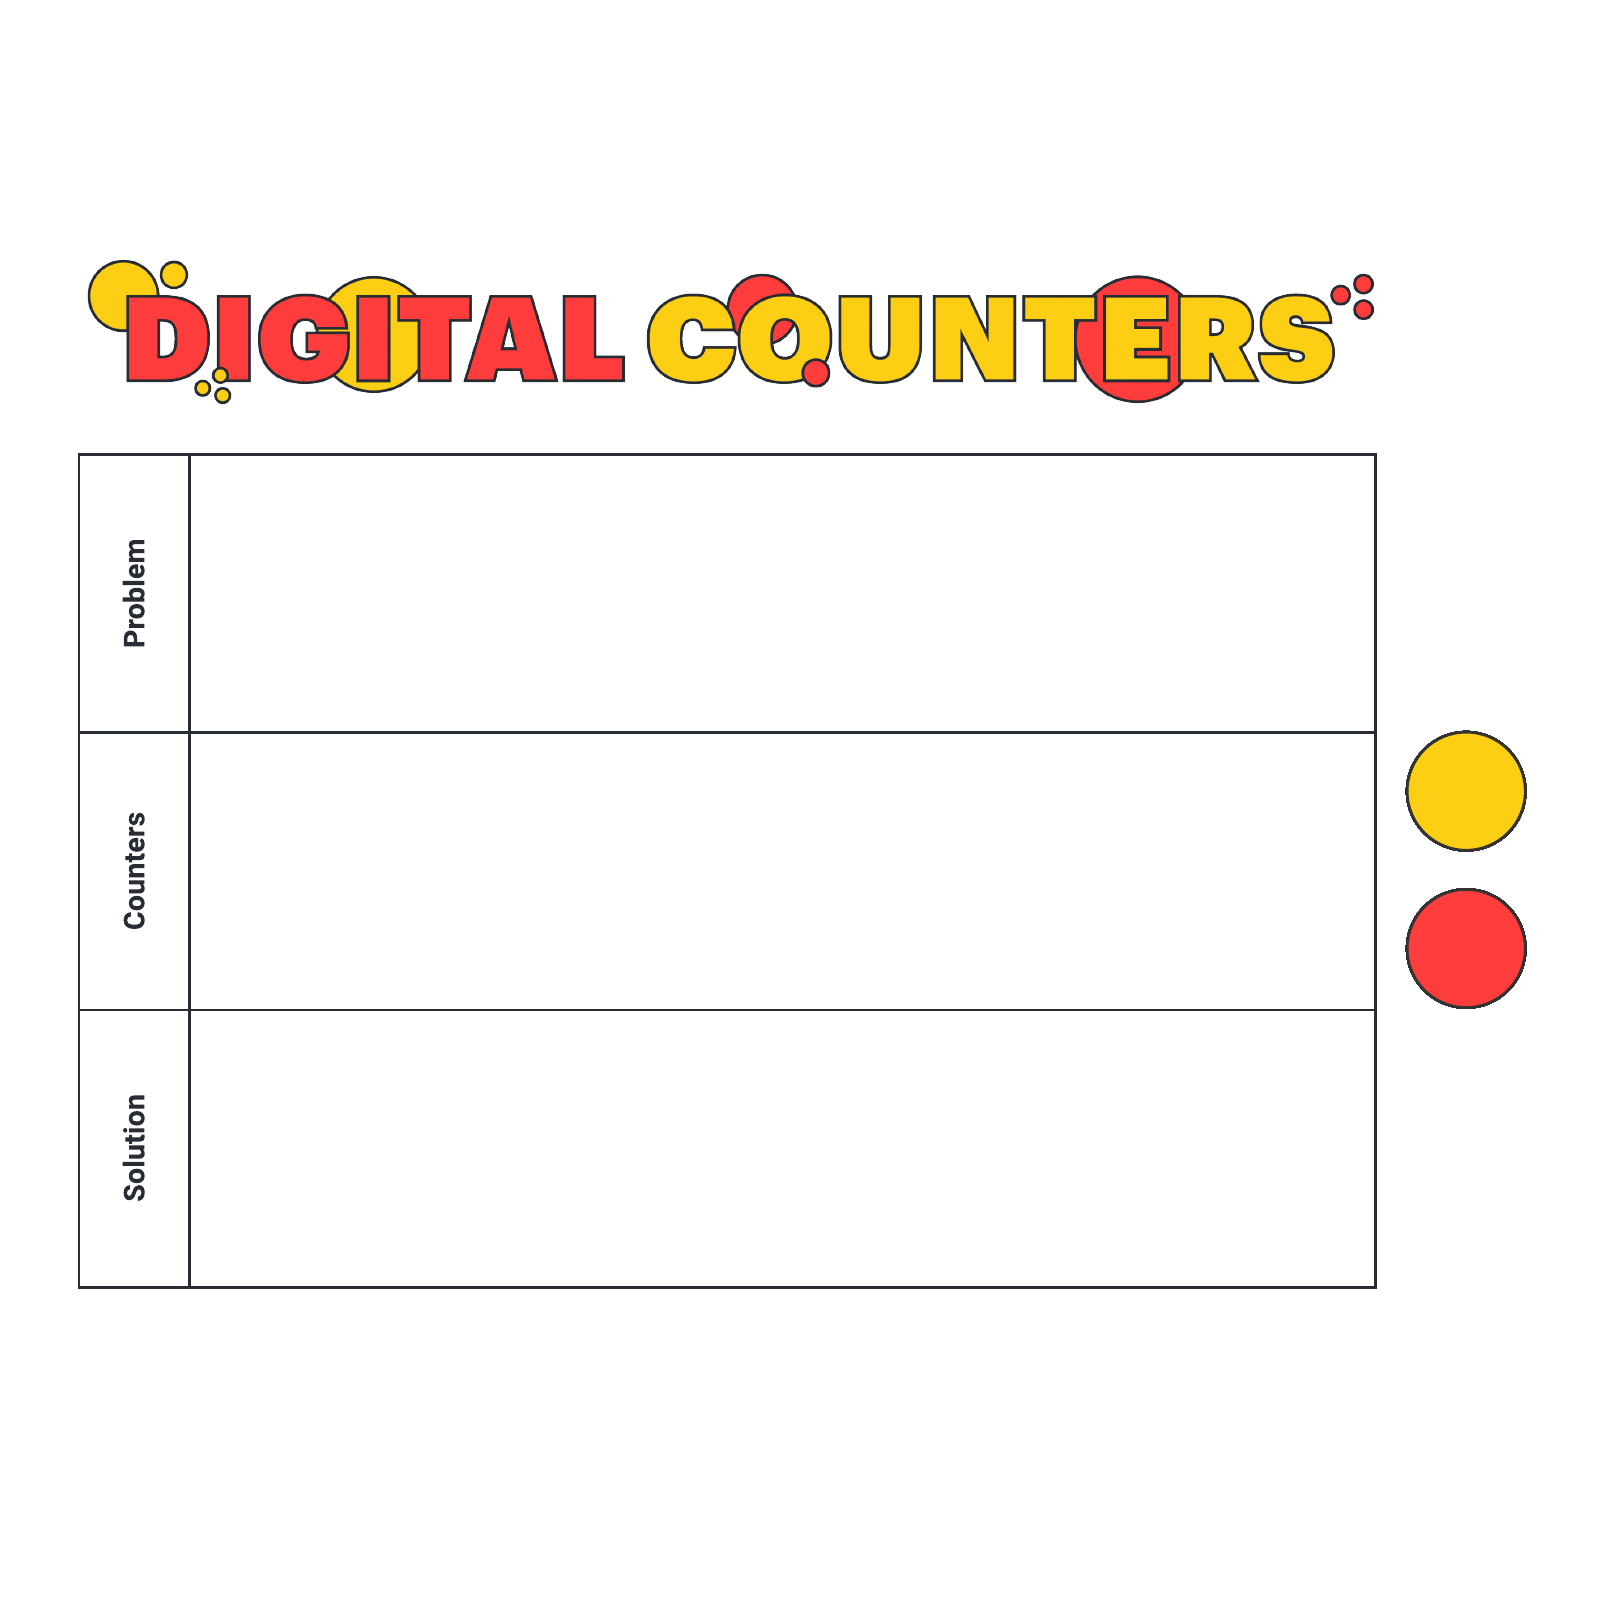 Digital counters example